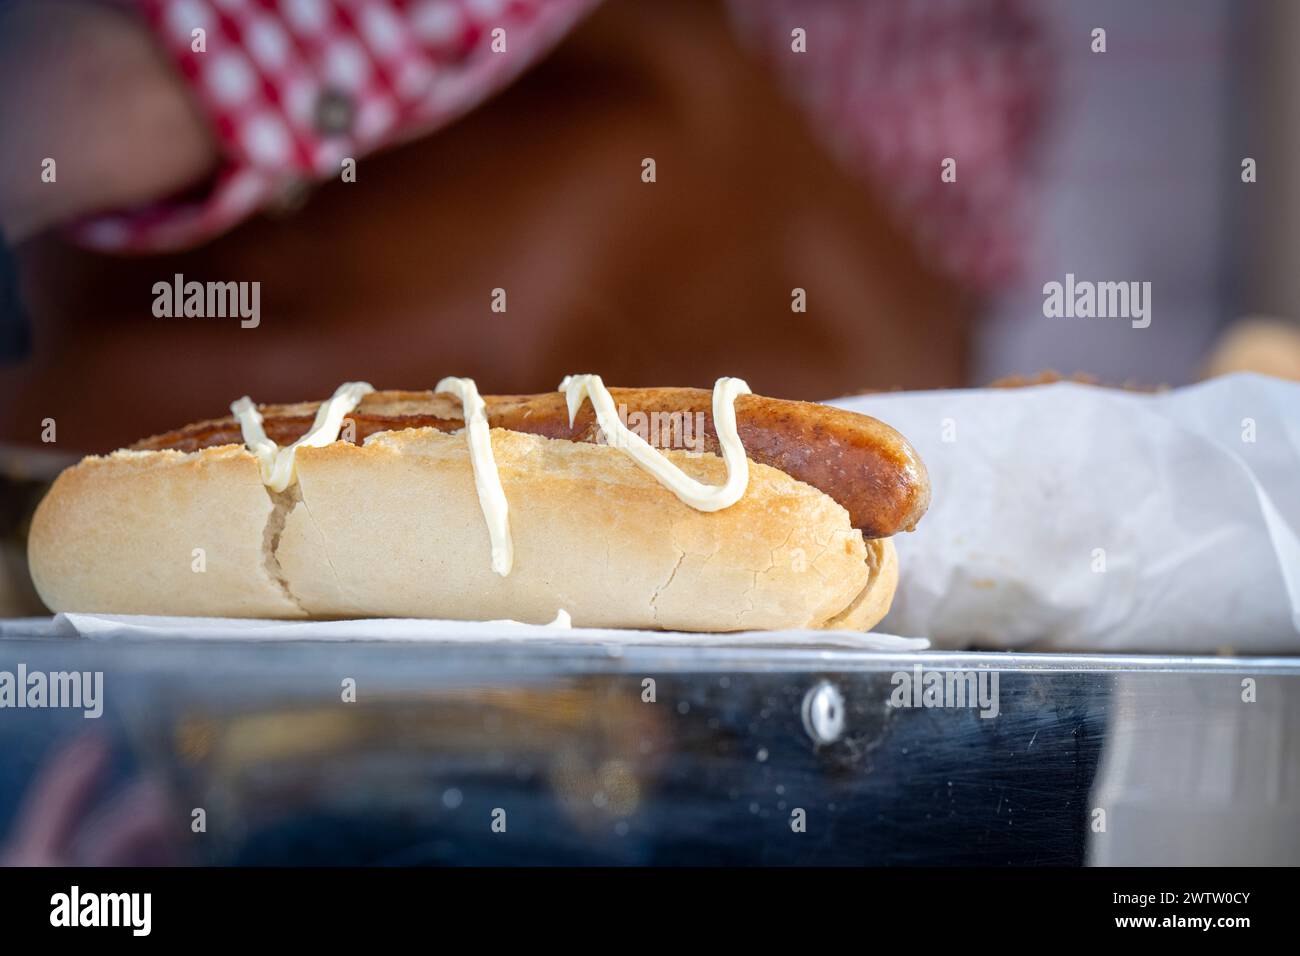 Hot dog with mustard on a counter Stock Photo